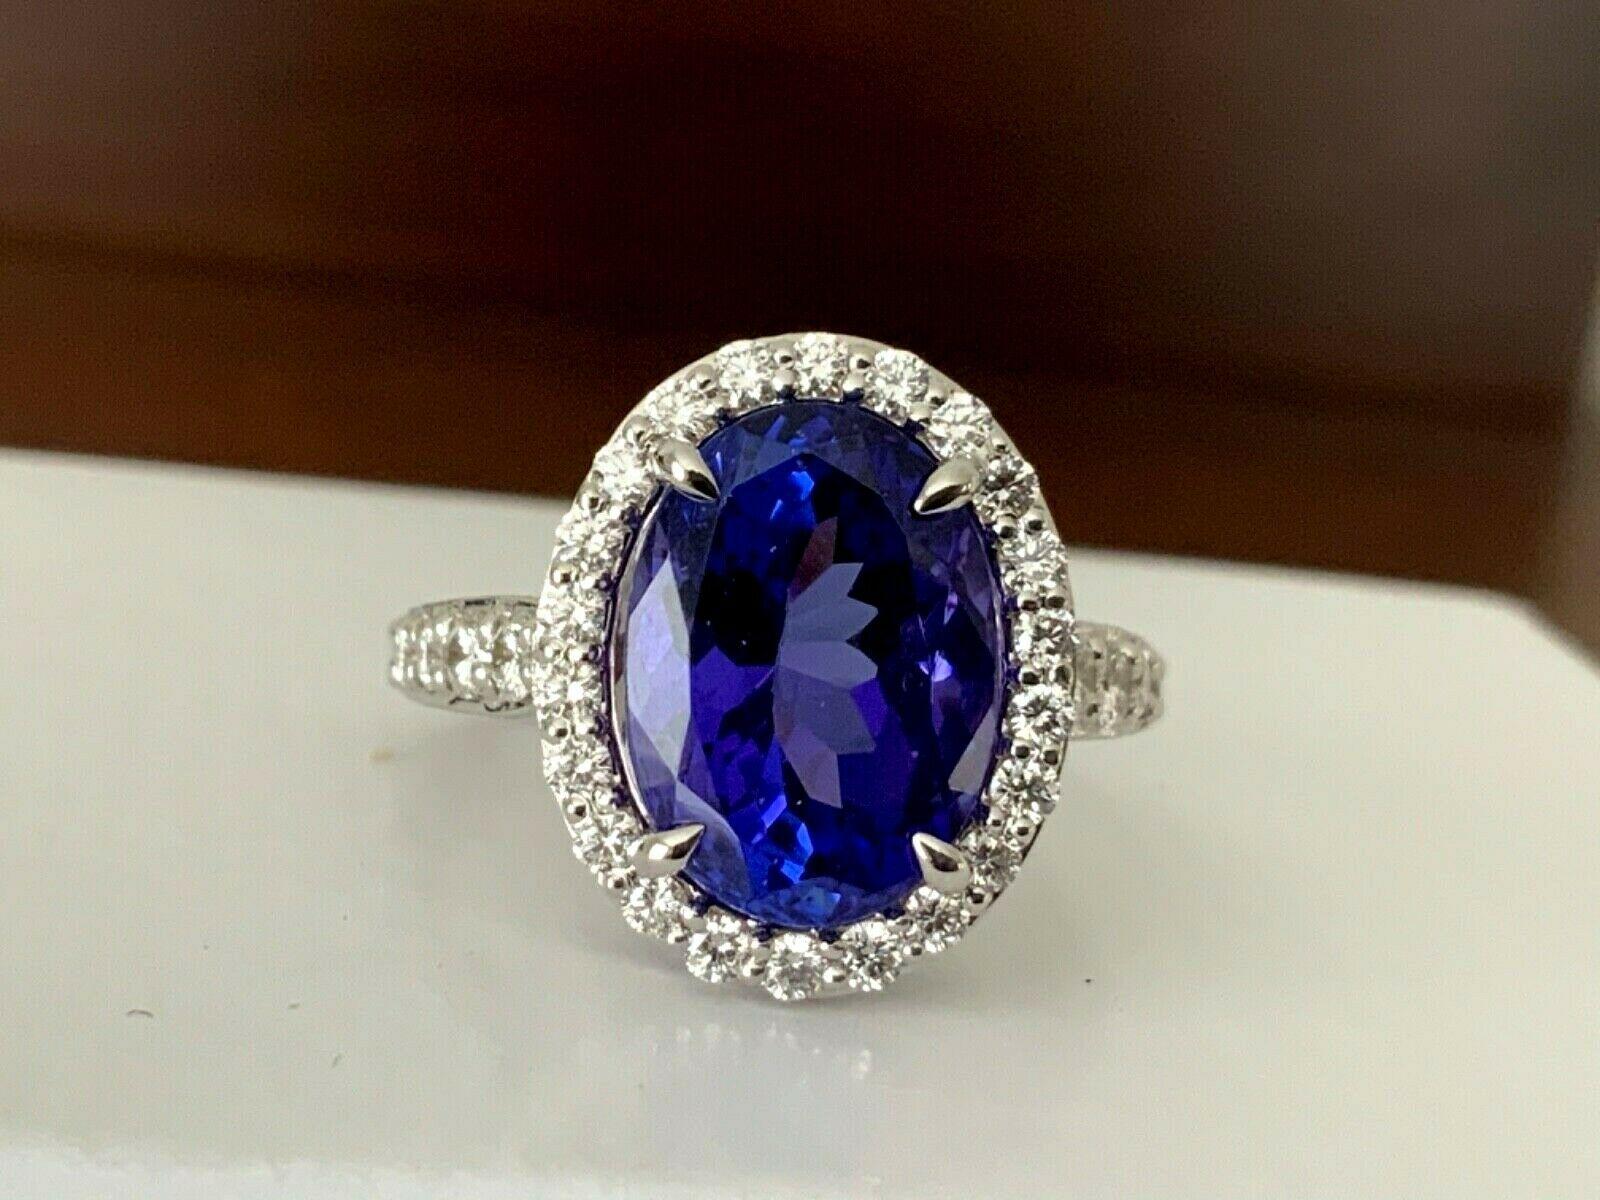 JUST IN TIME FOR THE HOLIDAYS!

We have been able to purchase one MOST VIVID 5.72 carat Natural Violet Tanzanite's we have ever seen.  The color of this tanzanite is a stunning vivid violet like you have never seen before.  The color is truly